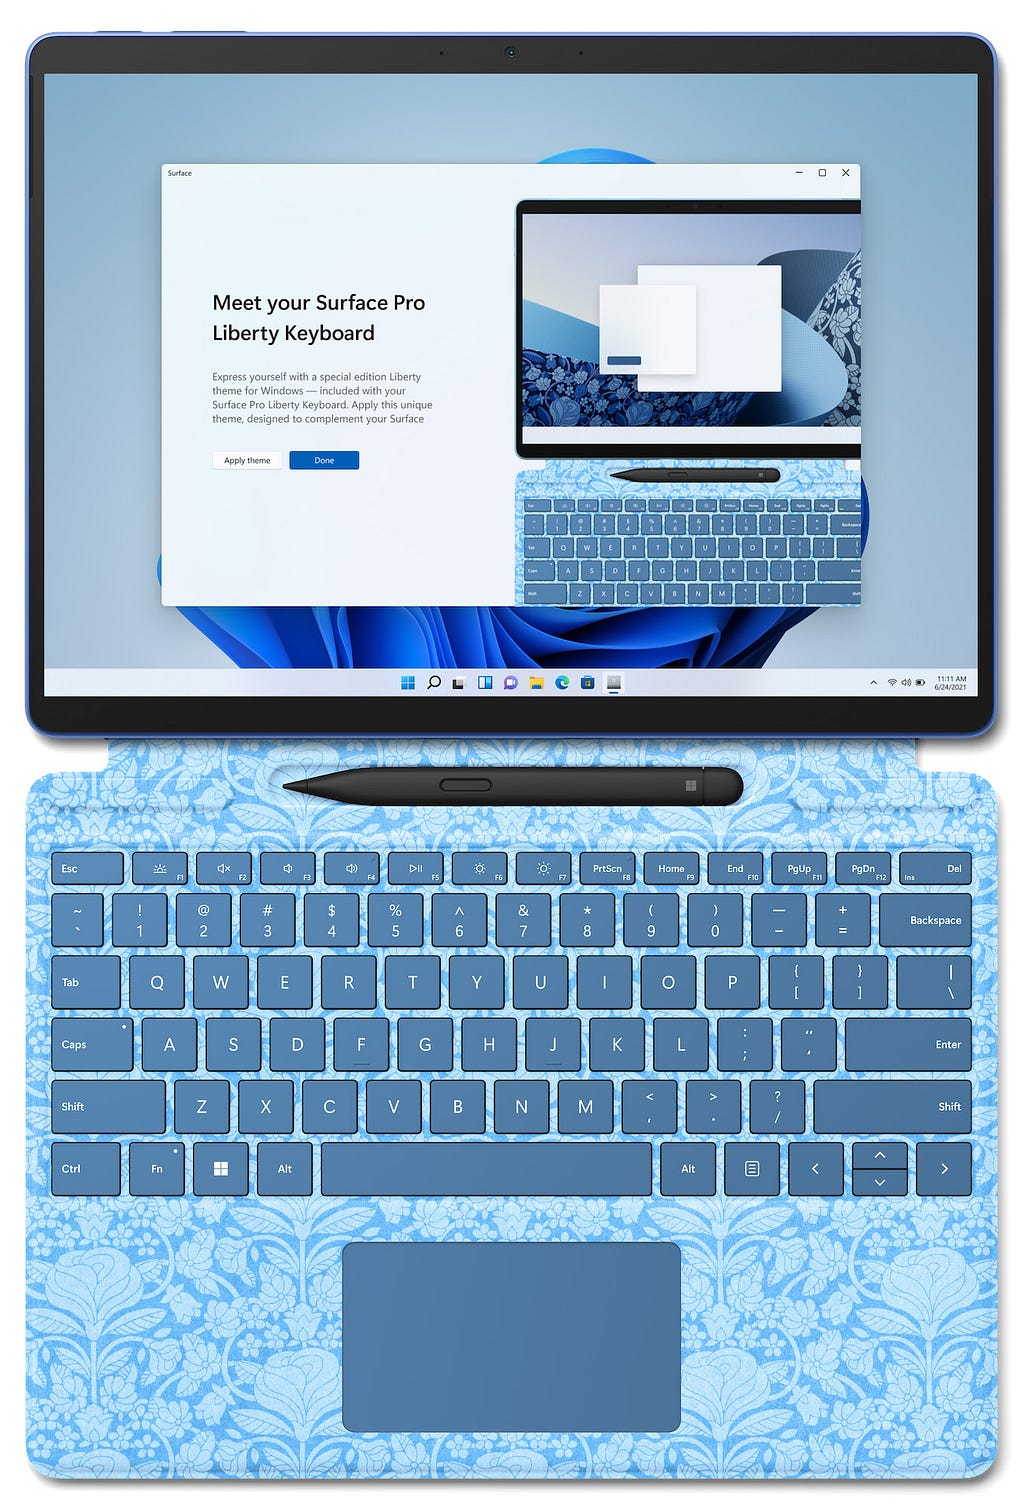 An open laptop with a printed keyboard with a welcome message